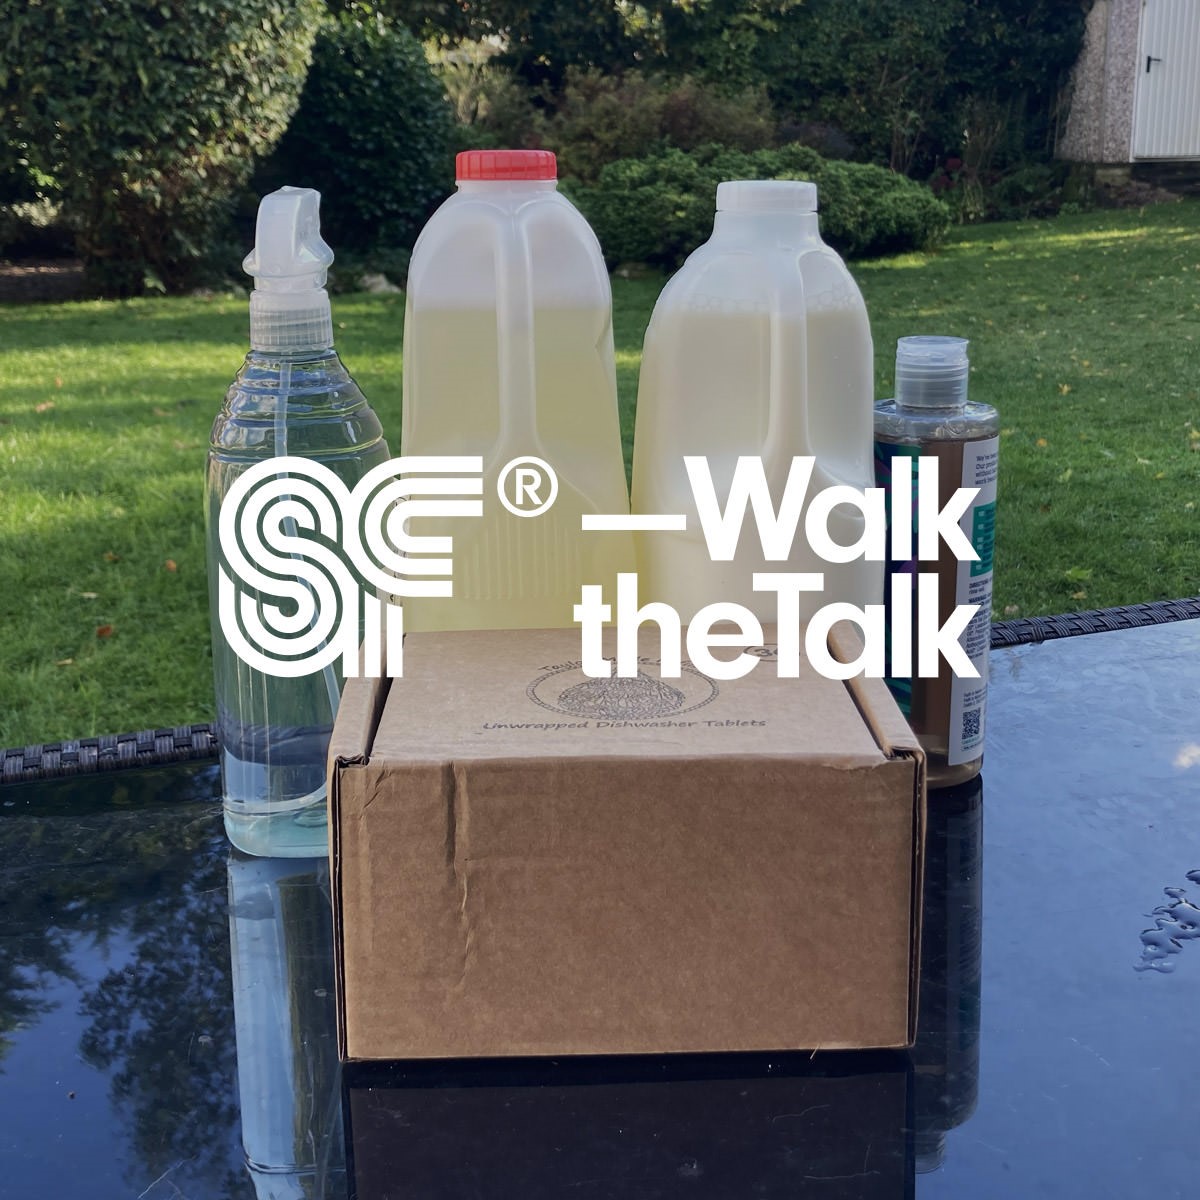 Superfried – Walk the Talk. Products from a local no-plastic shop tested as part of my transition to reducing my environmental impact.